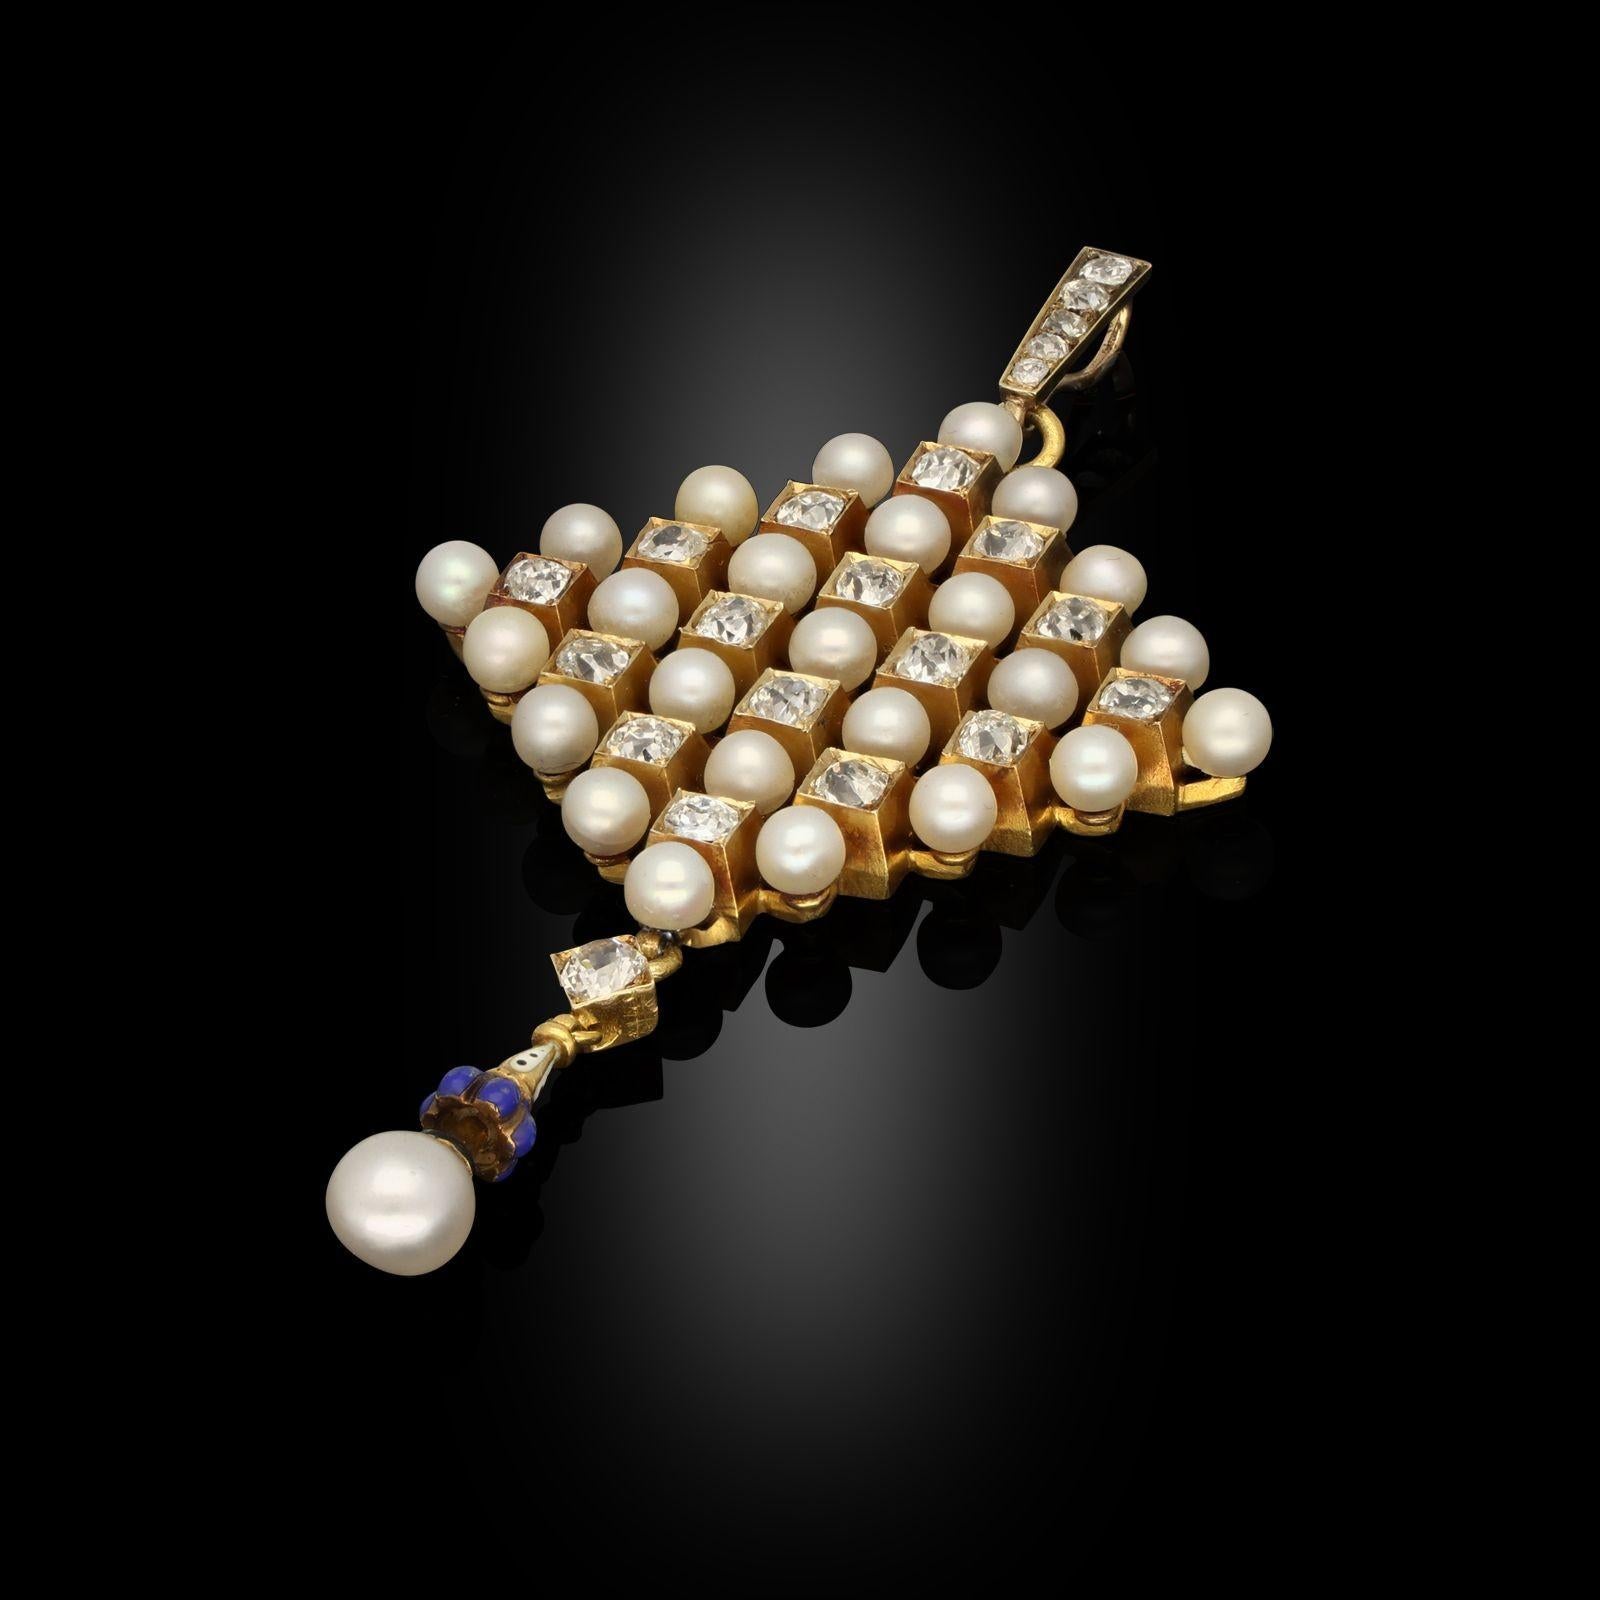 An antique natural pearl and diamond pendant attributed to Carlo Giuliano, circa 1880. The pendant is designed in a lozenge shape made up of alternating natural pearls and old mine cushion cut diamonds. Below is a drop of blue, cream and black